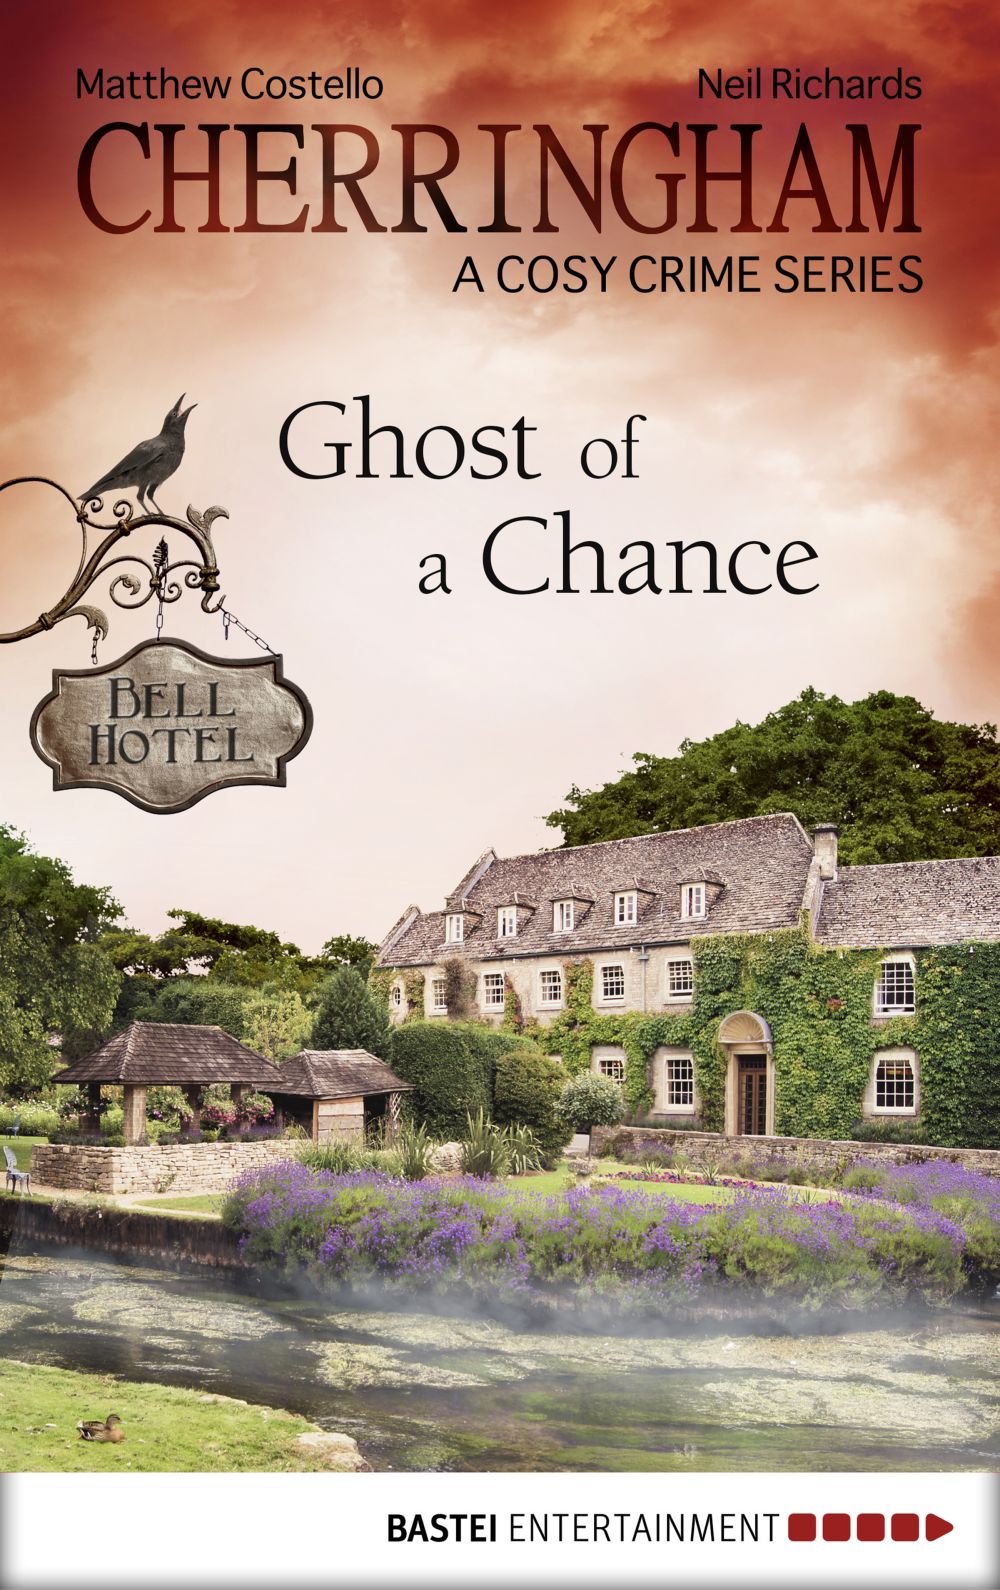 Cherringham--Ghost of a Chance (2015) by Neil Richards